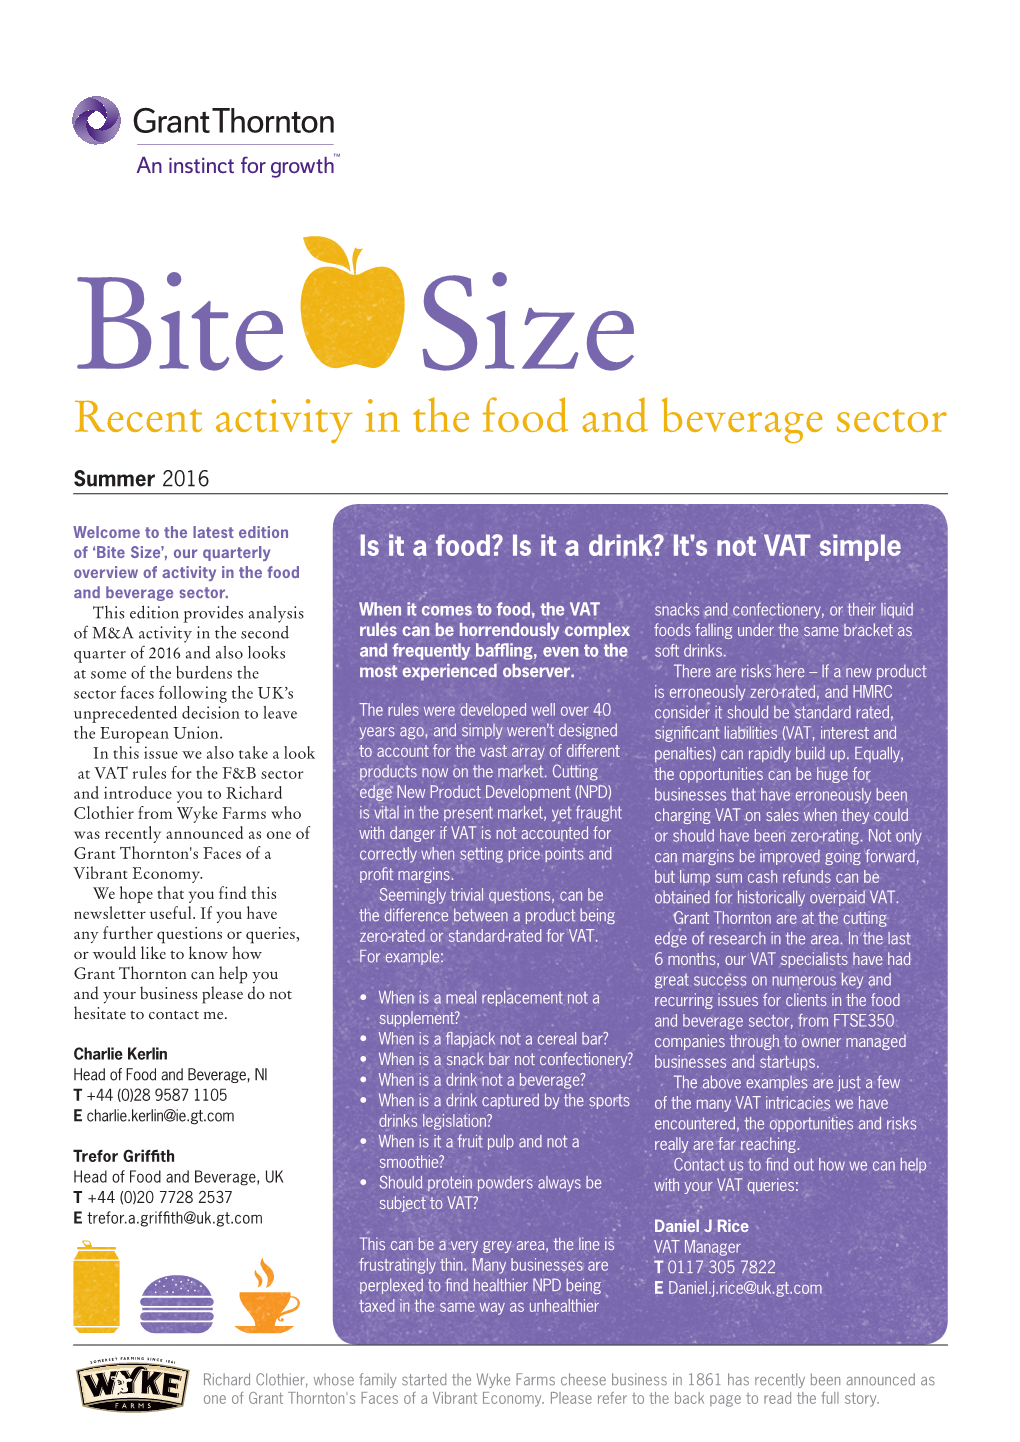 Recent Activity in the Food and Beverage Sector